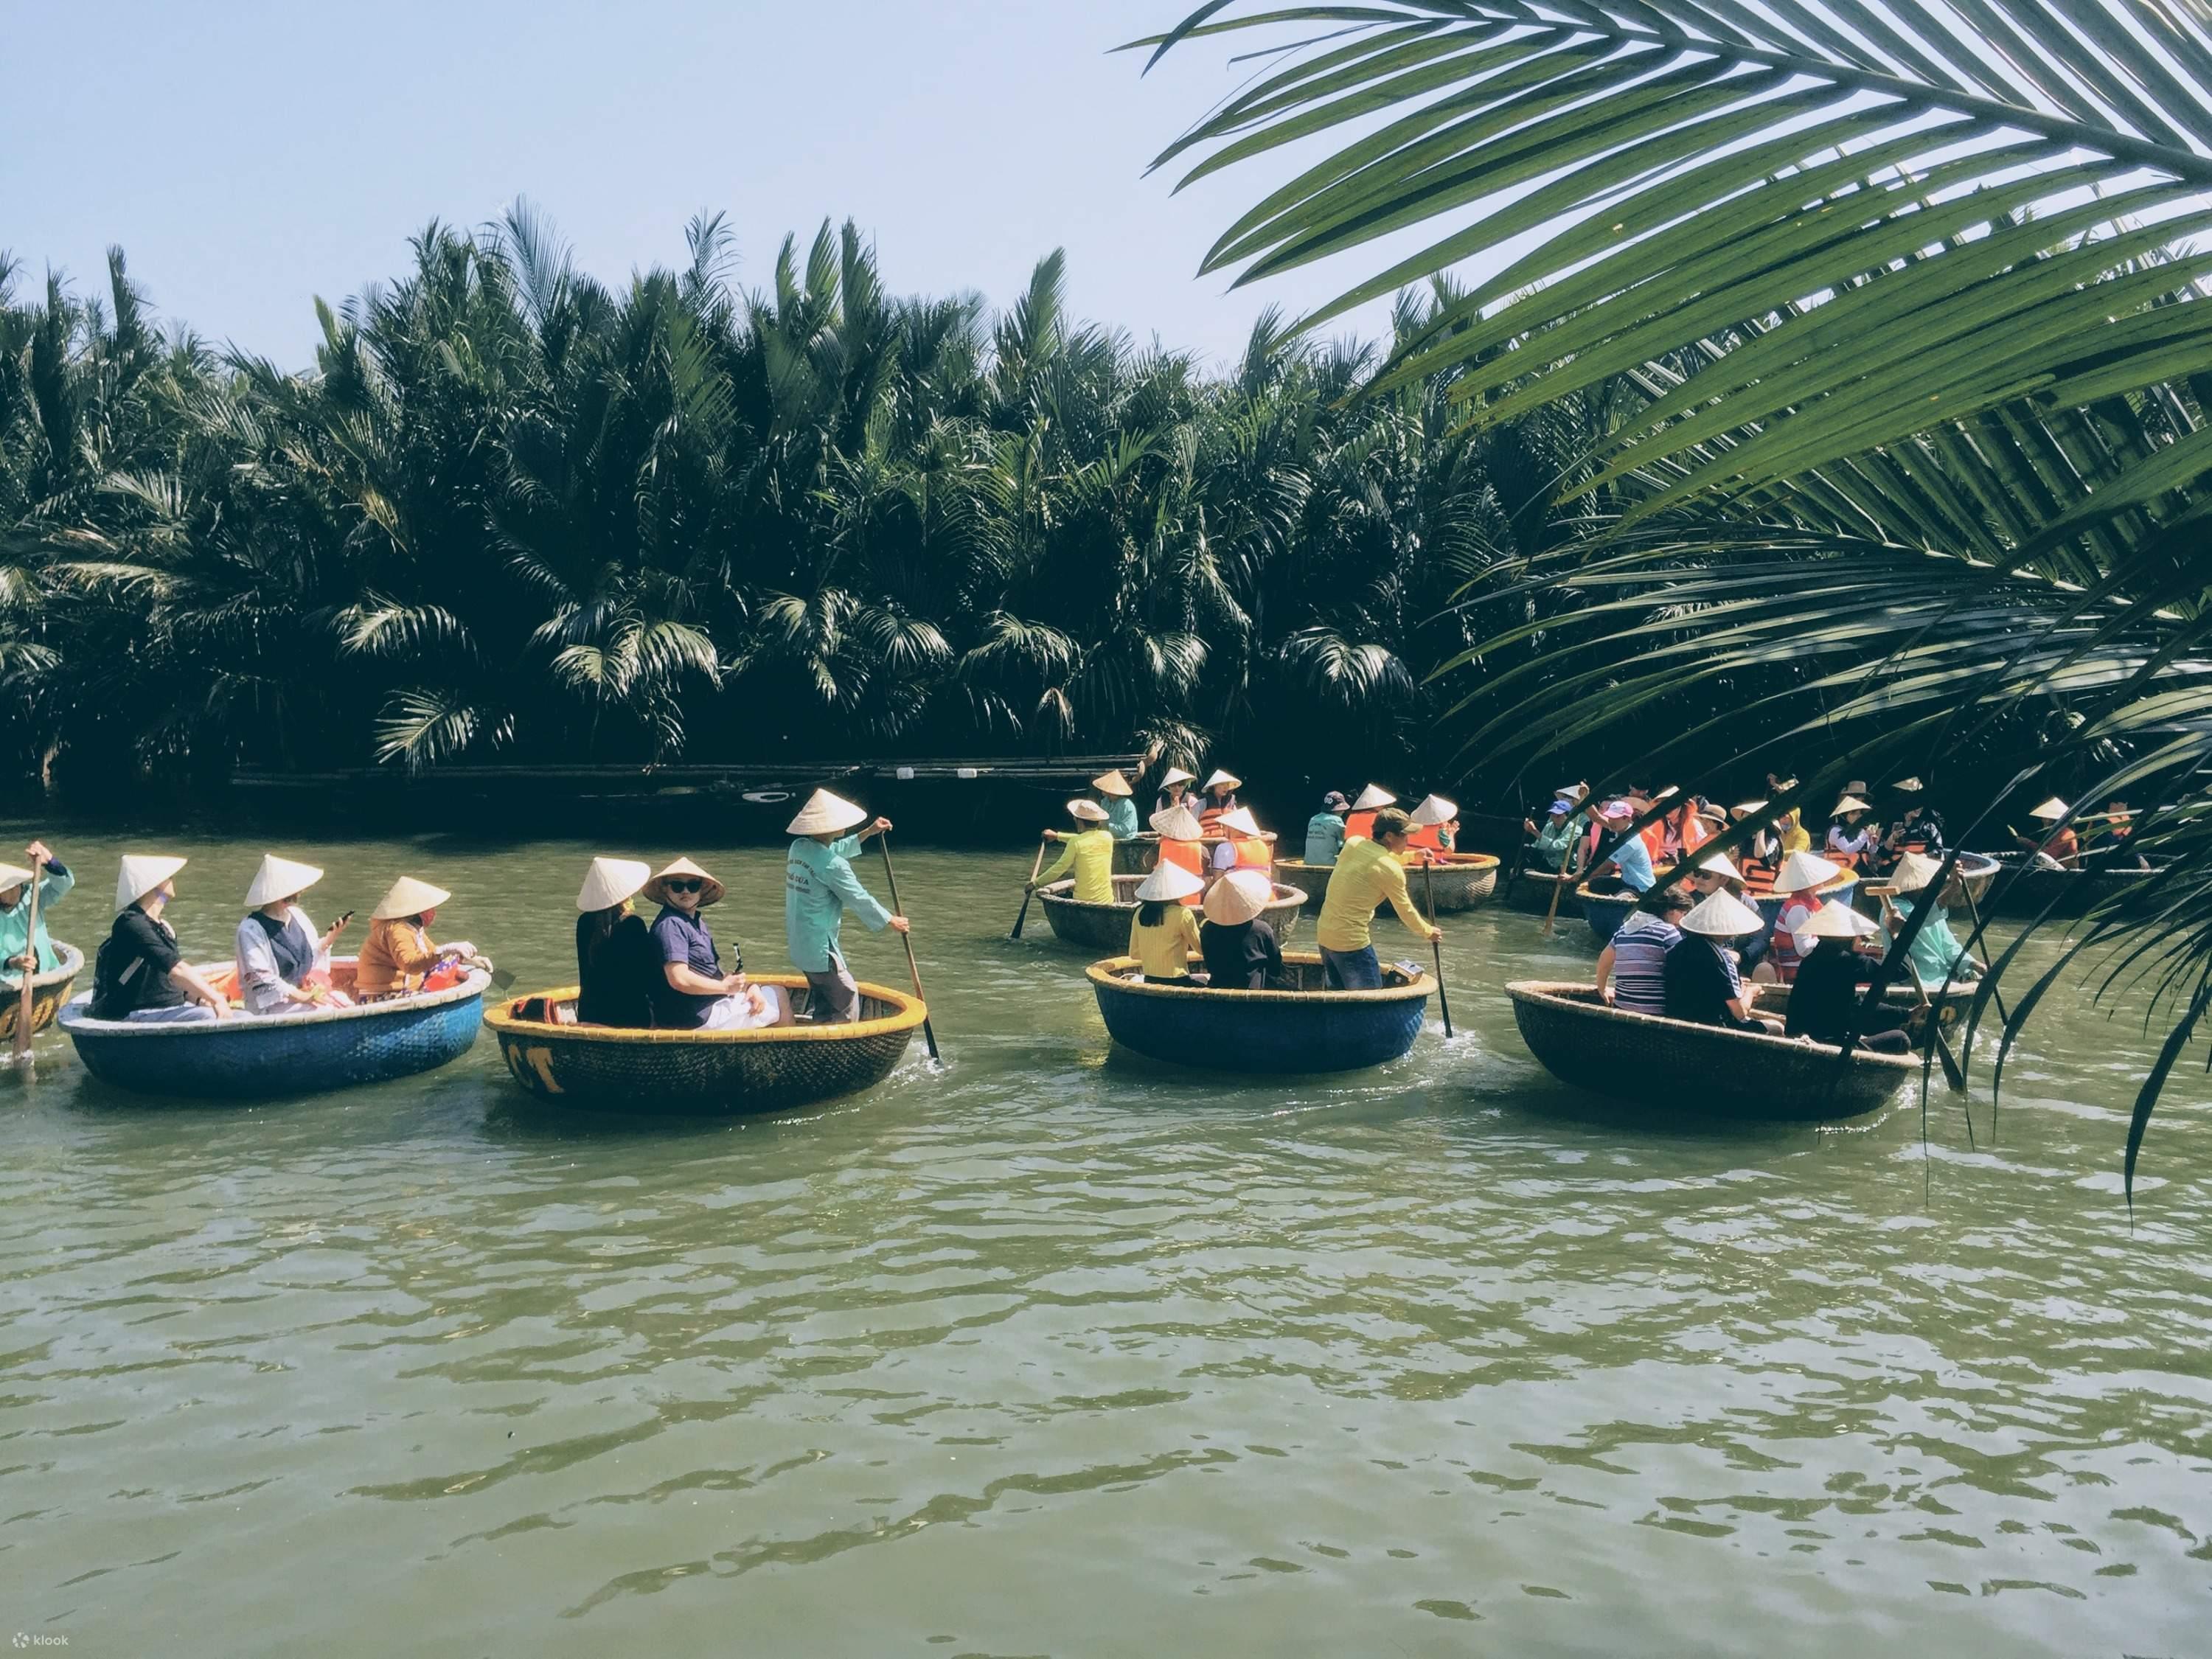 Thanh　Explore　Cam　Coconut　Forest　Tickets　Ride　Basket　Boat　Village